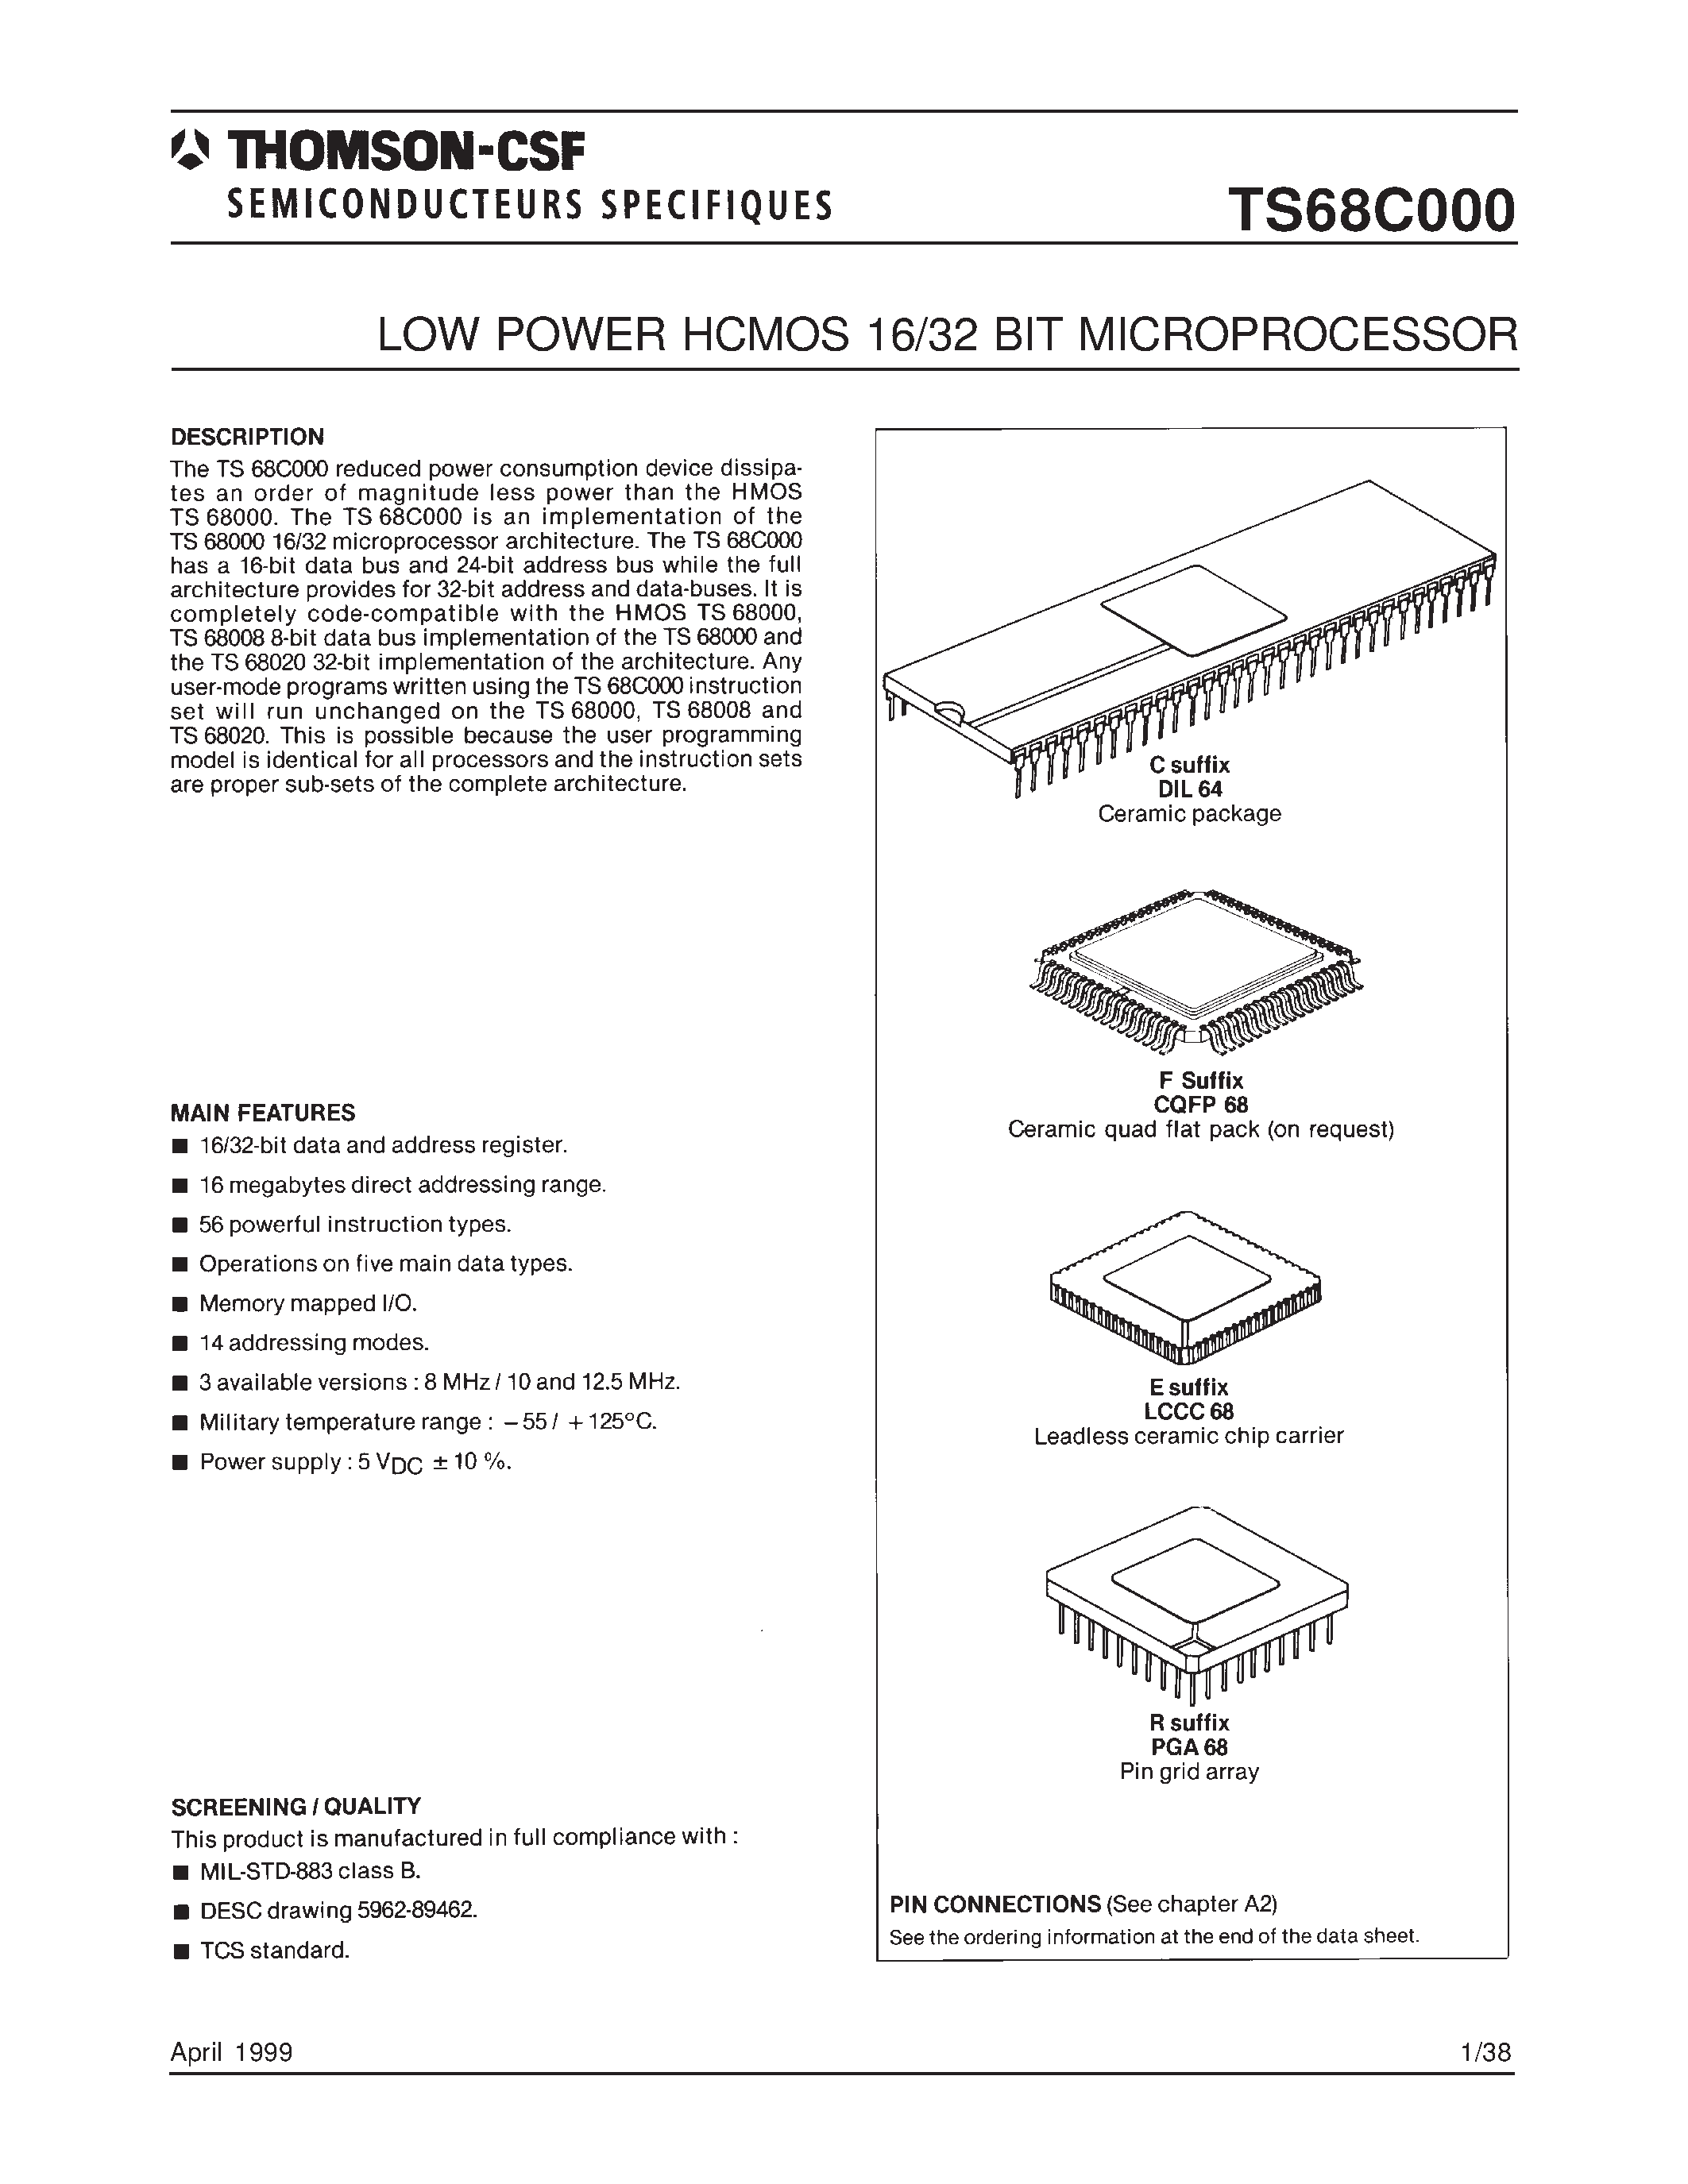 Datasheet TS68C000VC8A - LOW POWER HCMOS 16/32 BIT MICROPROCESSOR page 1